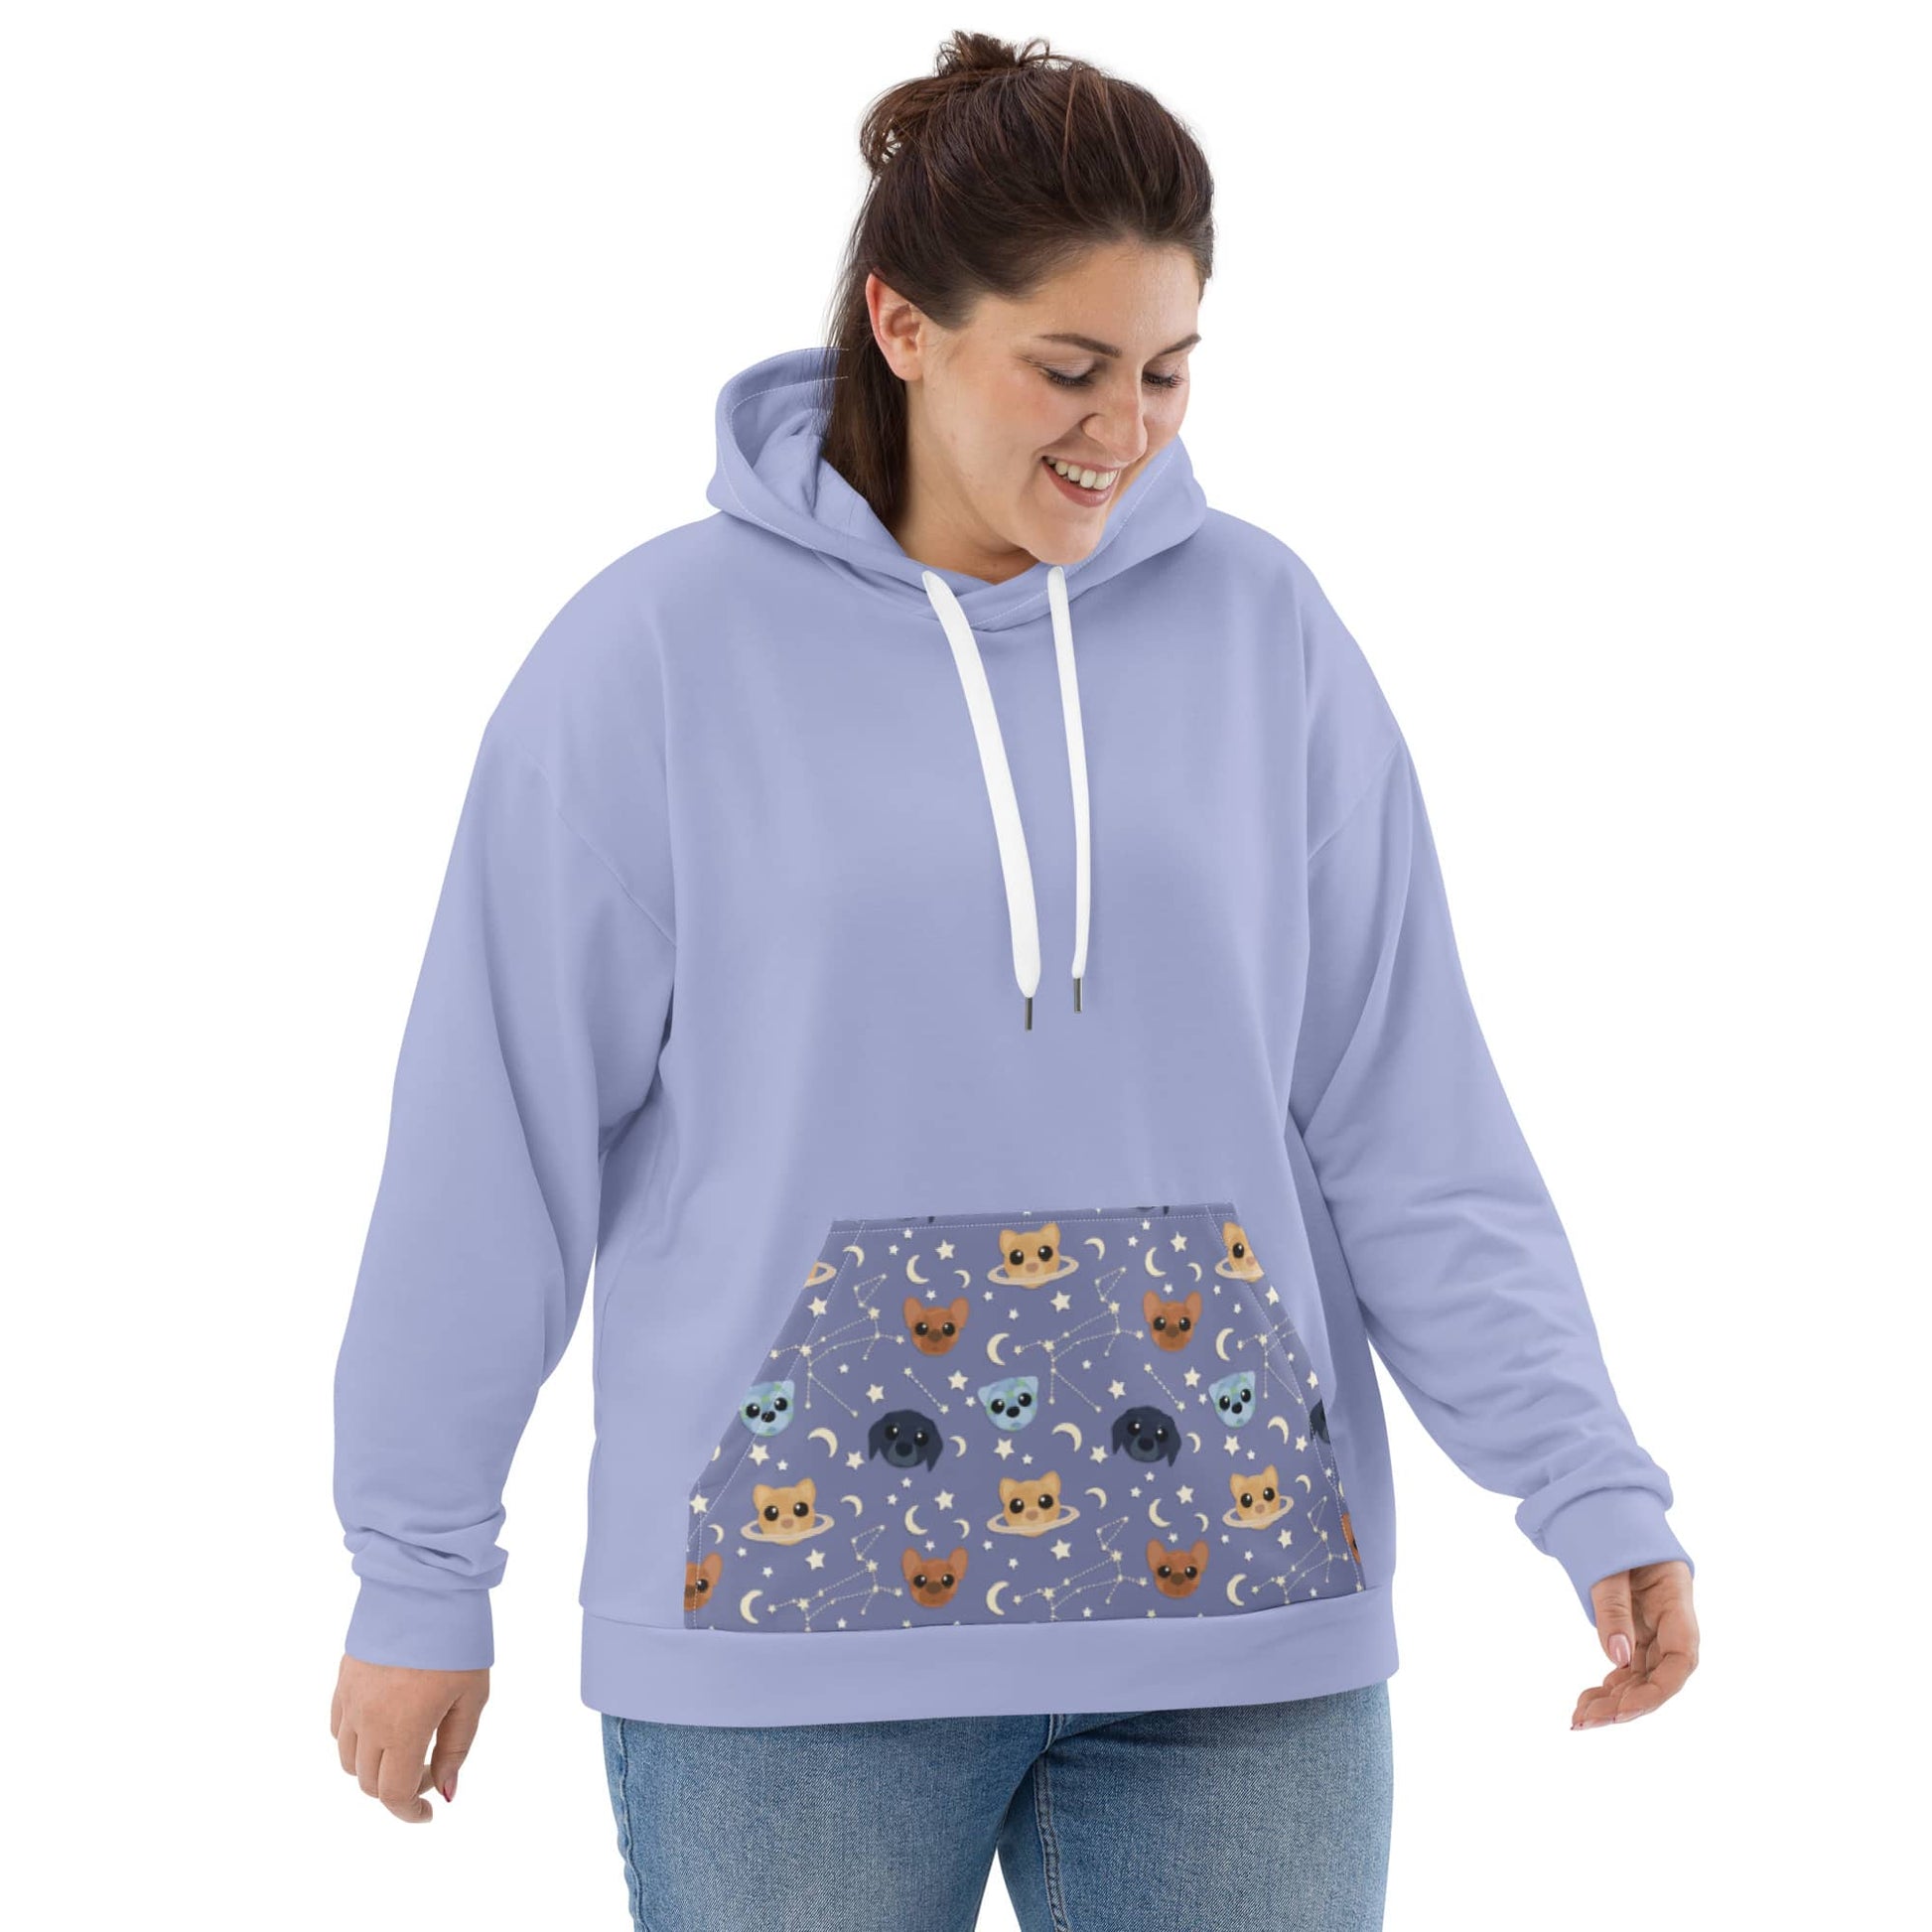 Shop plus-size Astro-Mutts Unisex Pullover Hoodie for dog moms by Boogs & Boop.